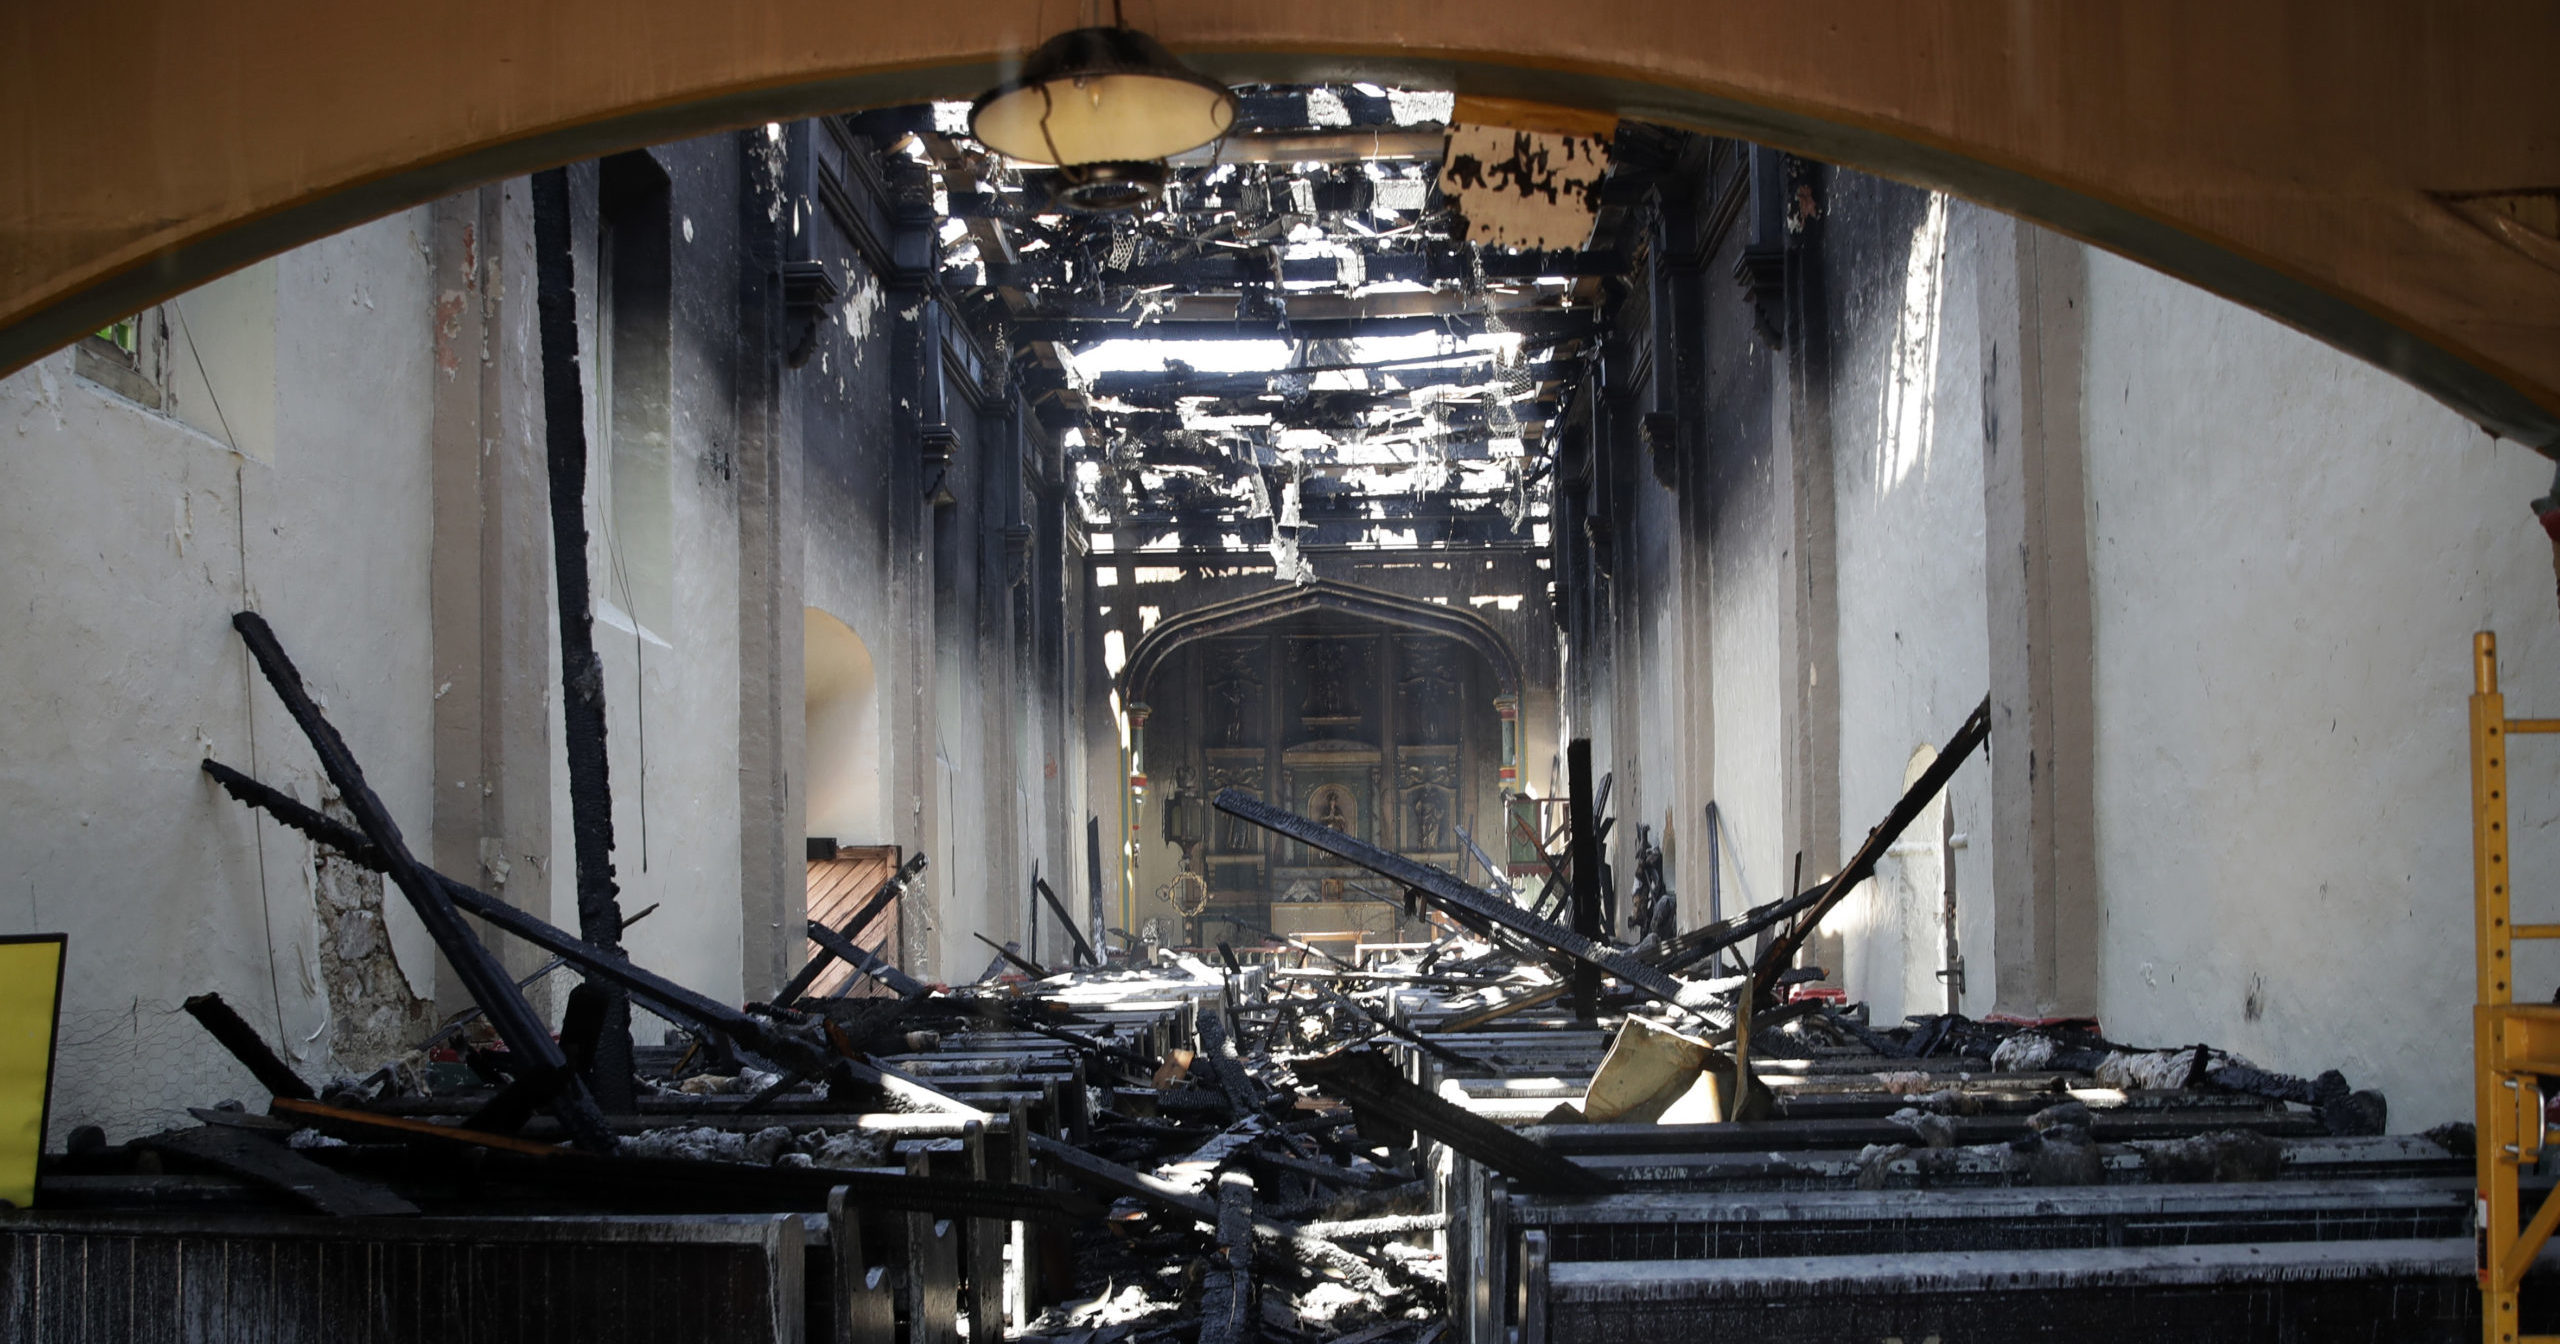 The interior of the San Gabriel Mission is damaged following a fire on July 11, 2020, in San Gabriel, California. The fire destroyed the rooftop and most of the interior of the nearly 250-year-old California church.